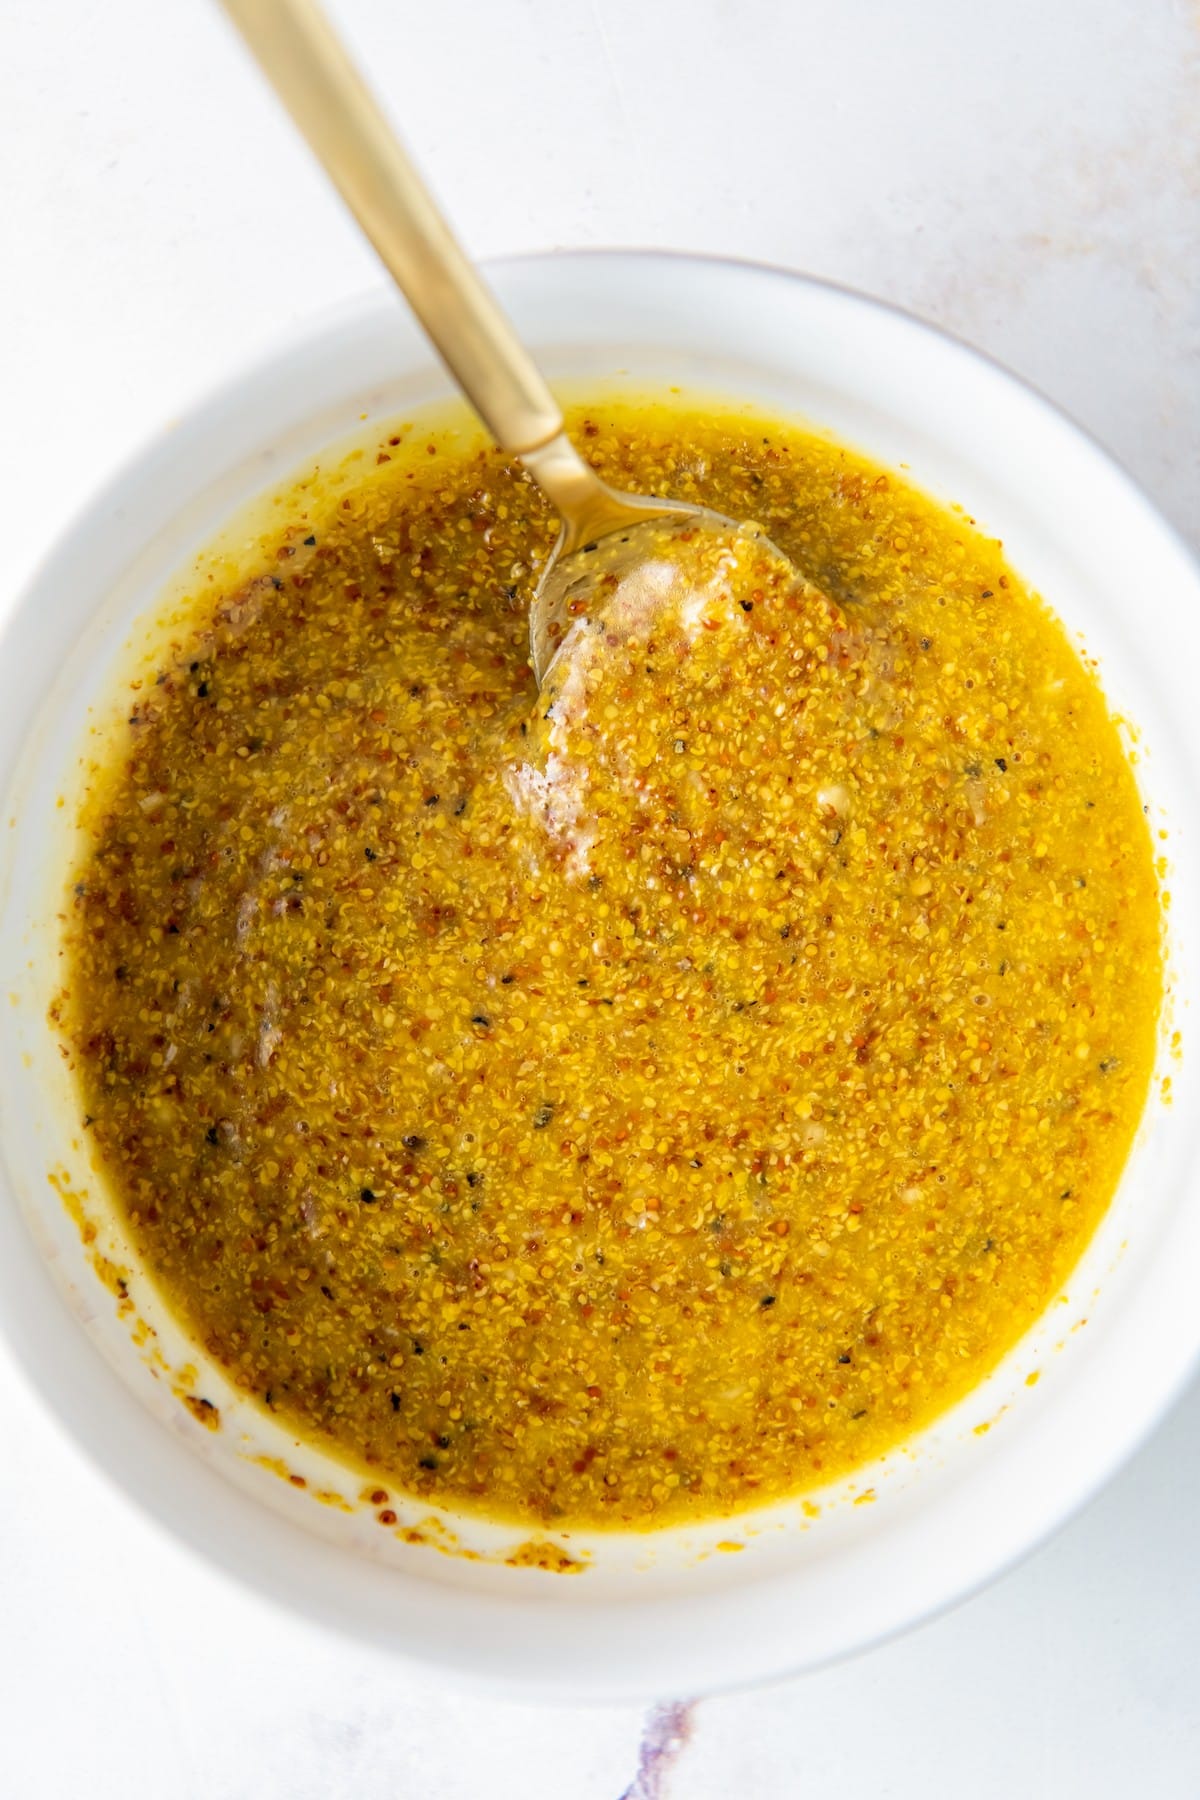 Dijon mustard dressing with olive oil and lemon juice.